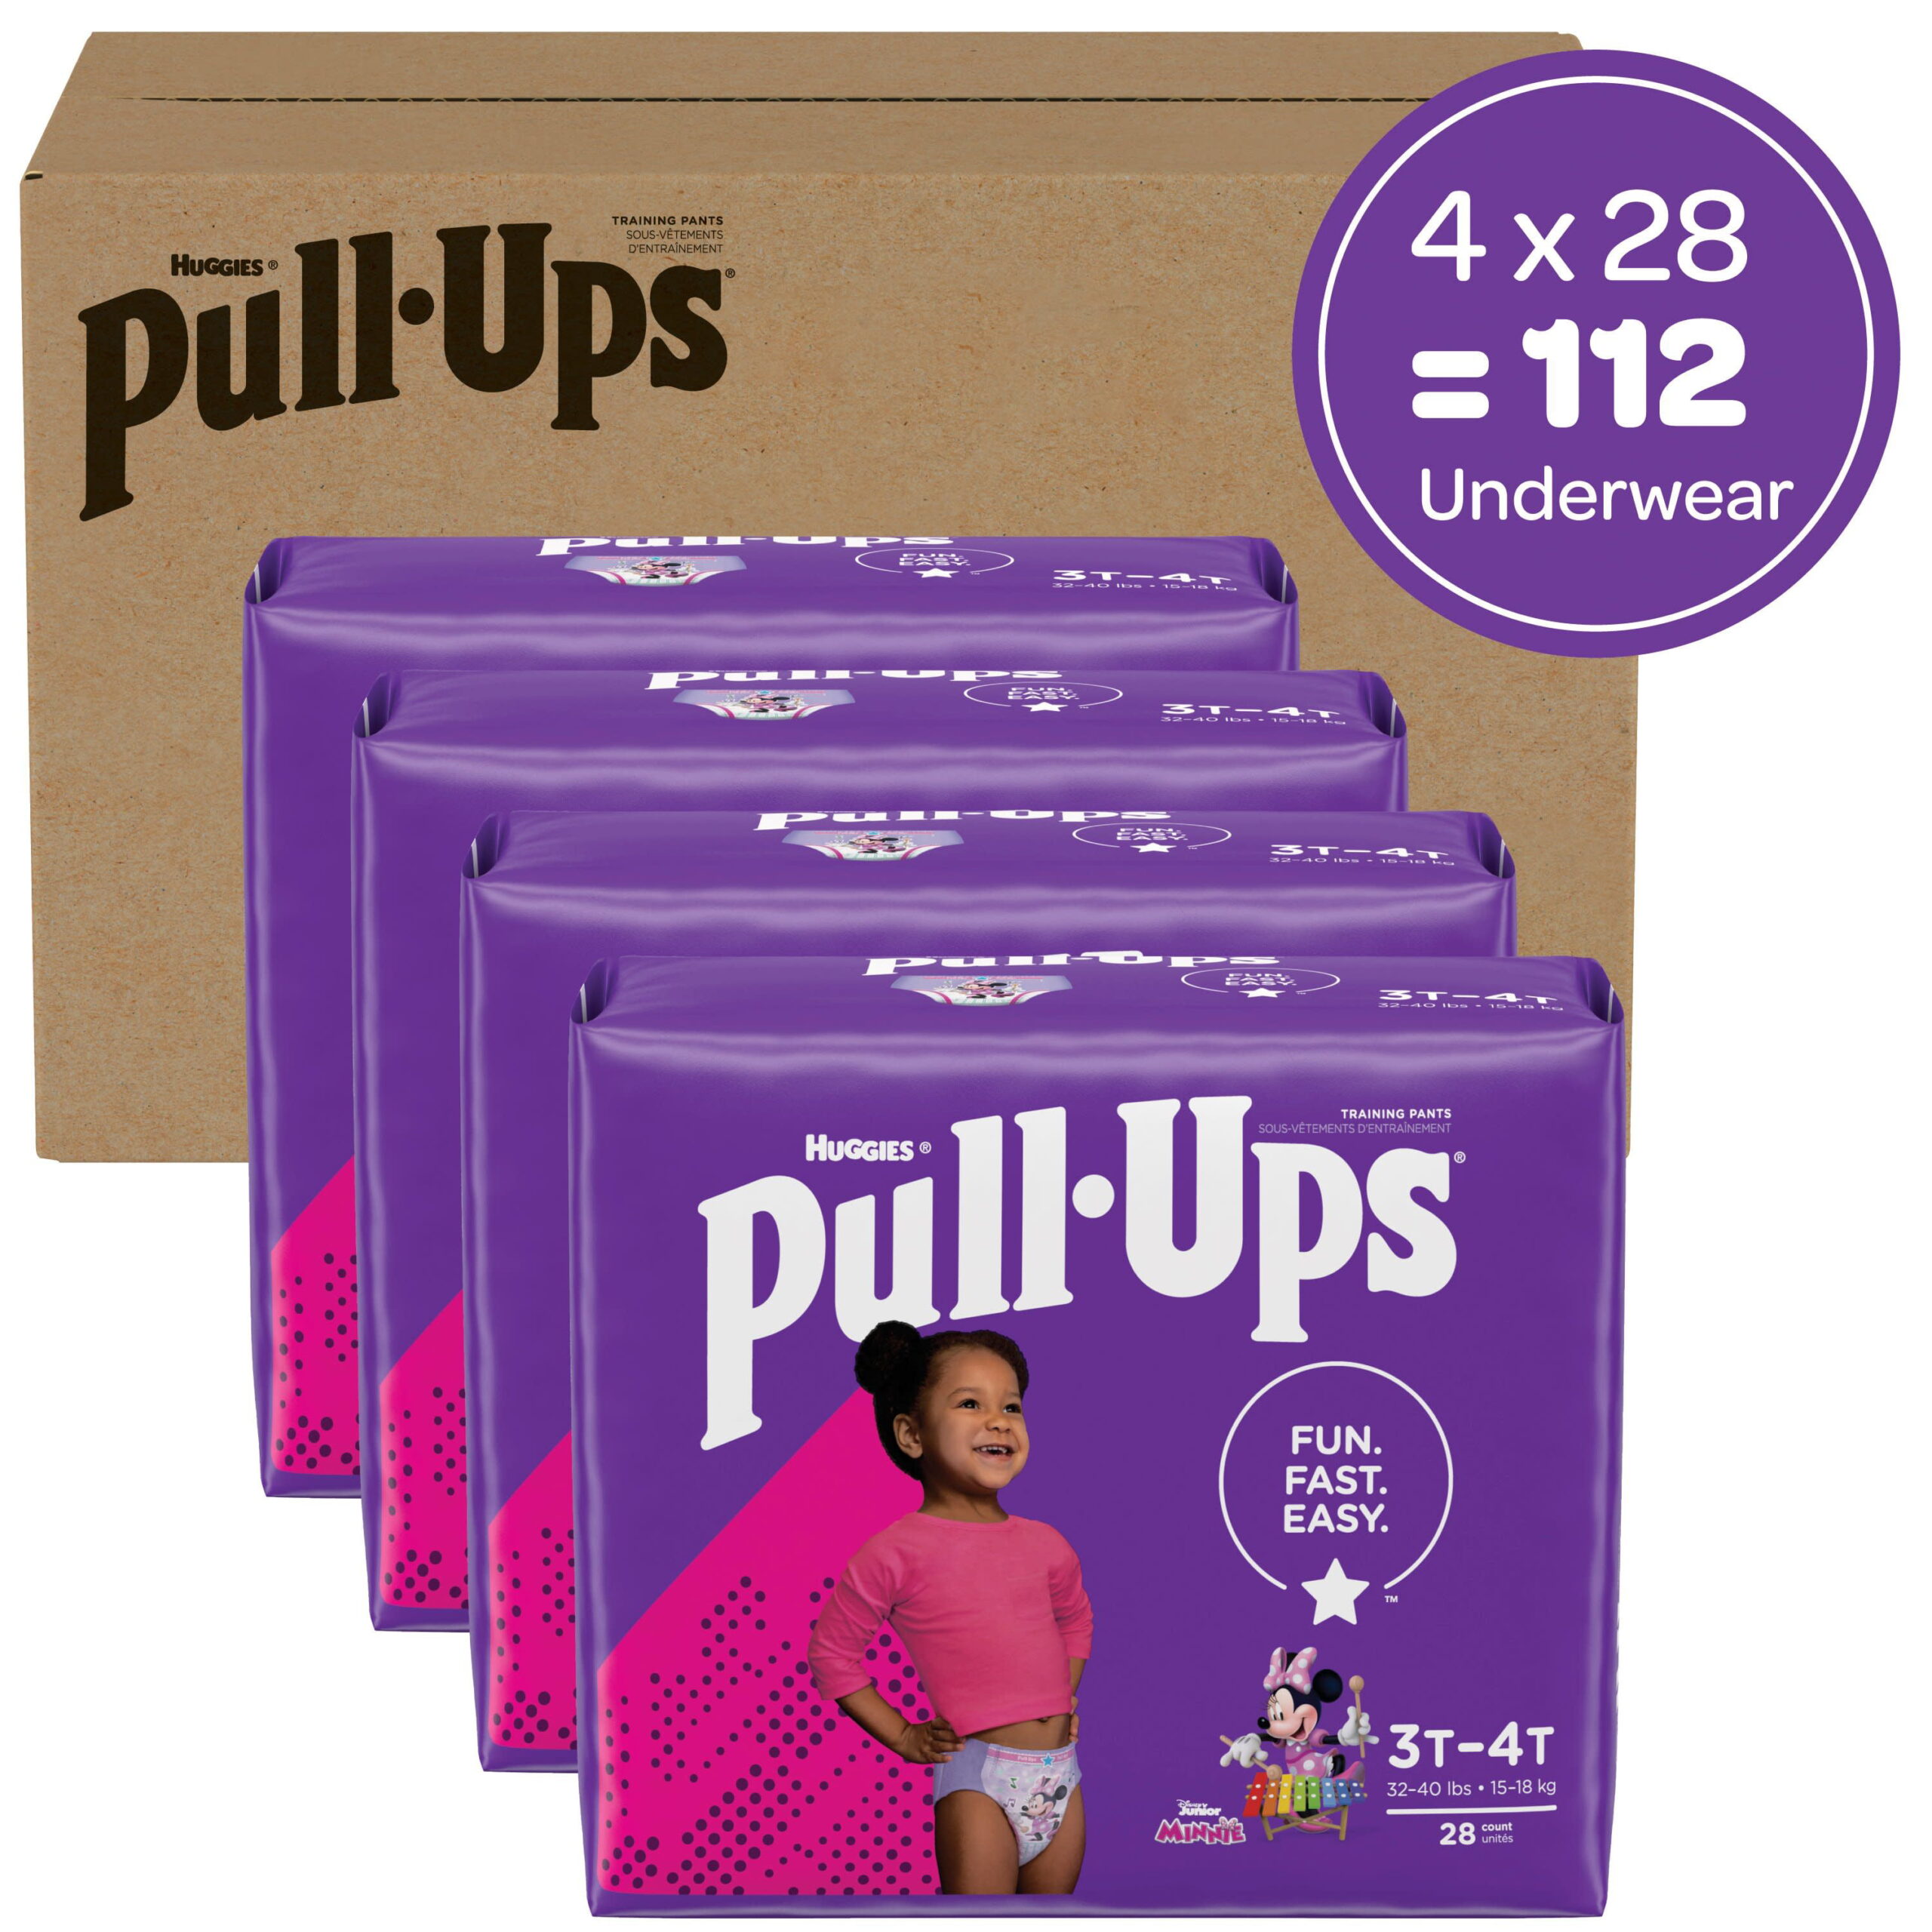 Pull Ups - Pull Ups, Learning Designs - Training Pants, Disney Junior Minnie,  3T-4T (32-40 lbs) (22 count), Shop